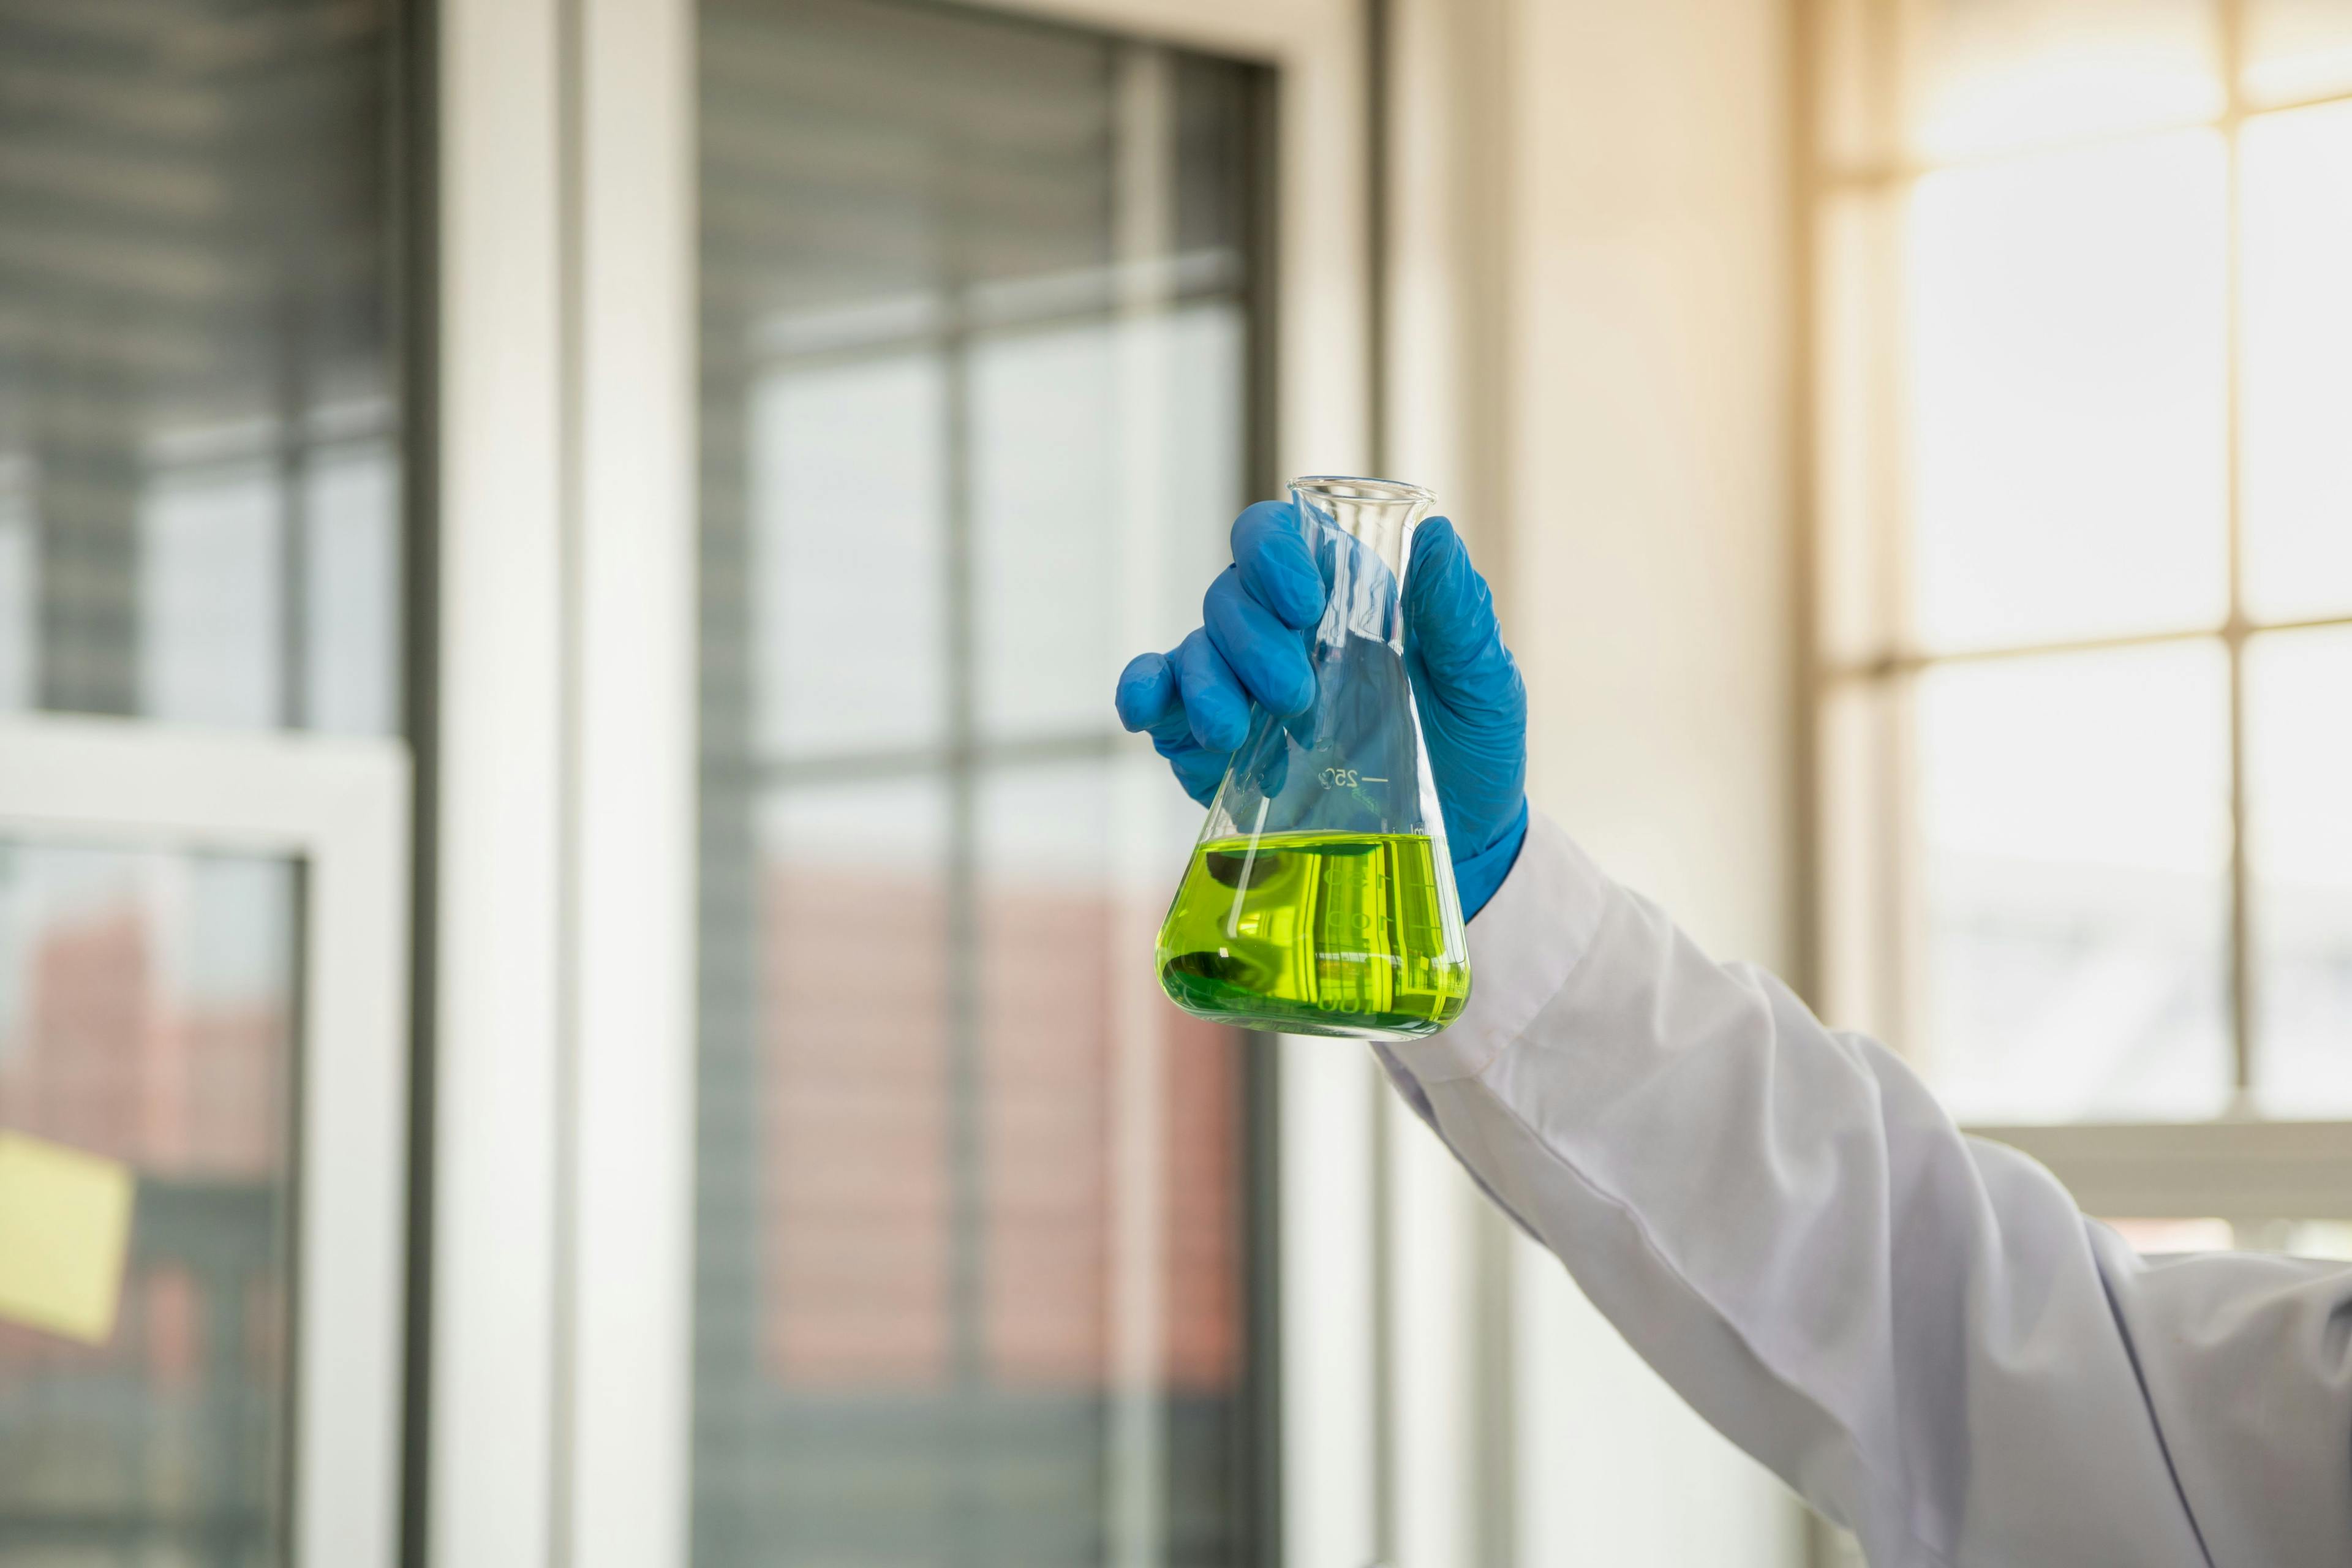 Science and Healthcare Concept. Closeup of doctor scientists hand holding green liquid chemicals flask in a laboratory. | Image Credit: © Montri Thipsorn - stock.adobe.com.